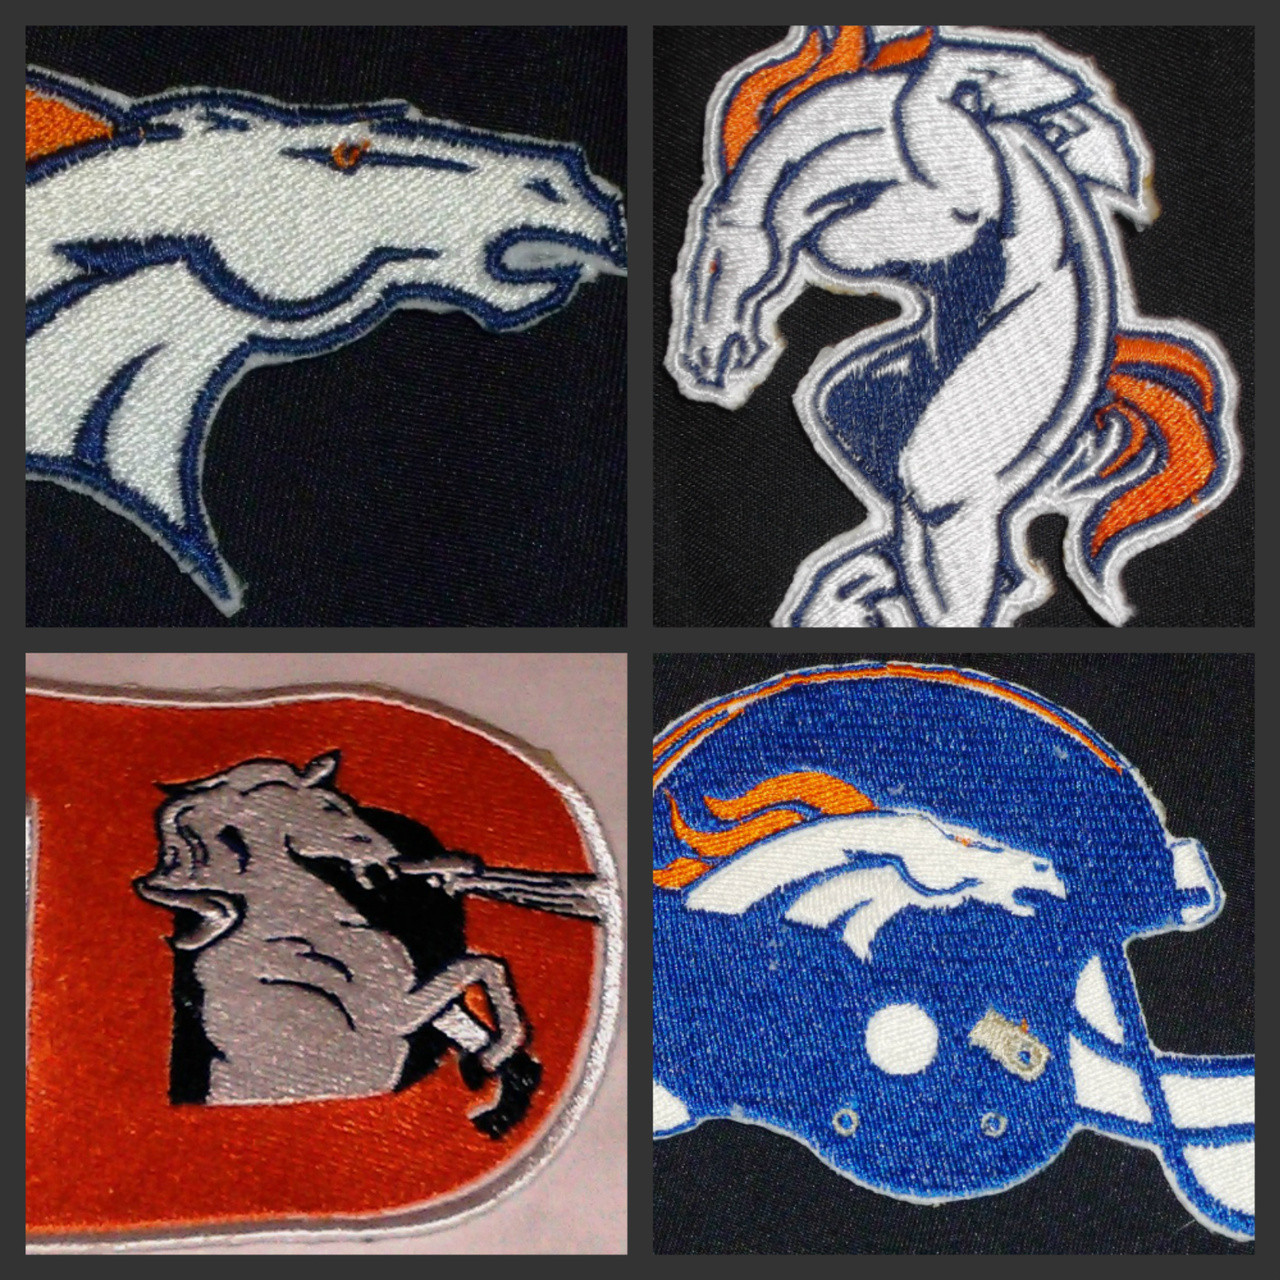 Denver Broncos Iron On Patches - Beyond Vision Mall